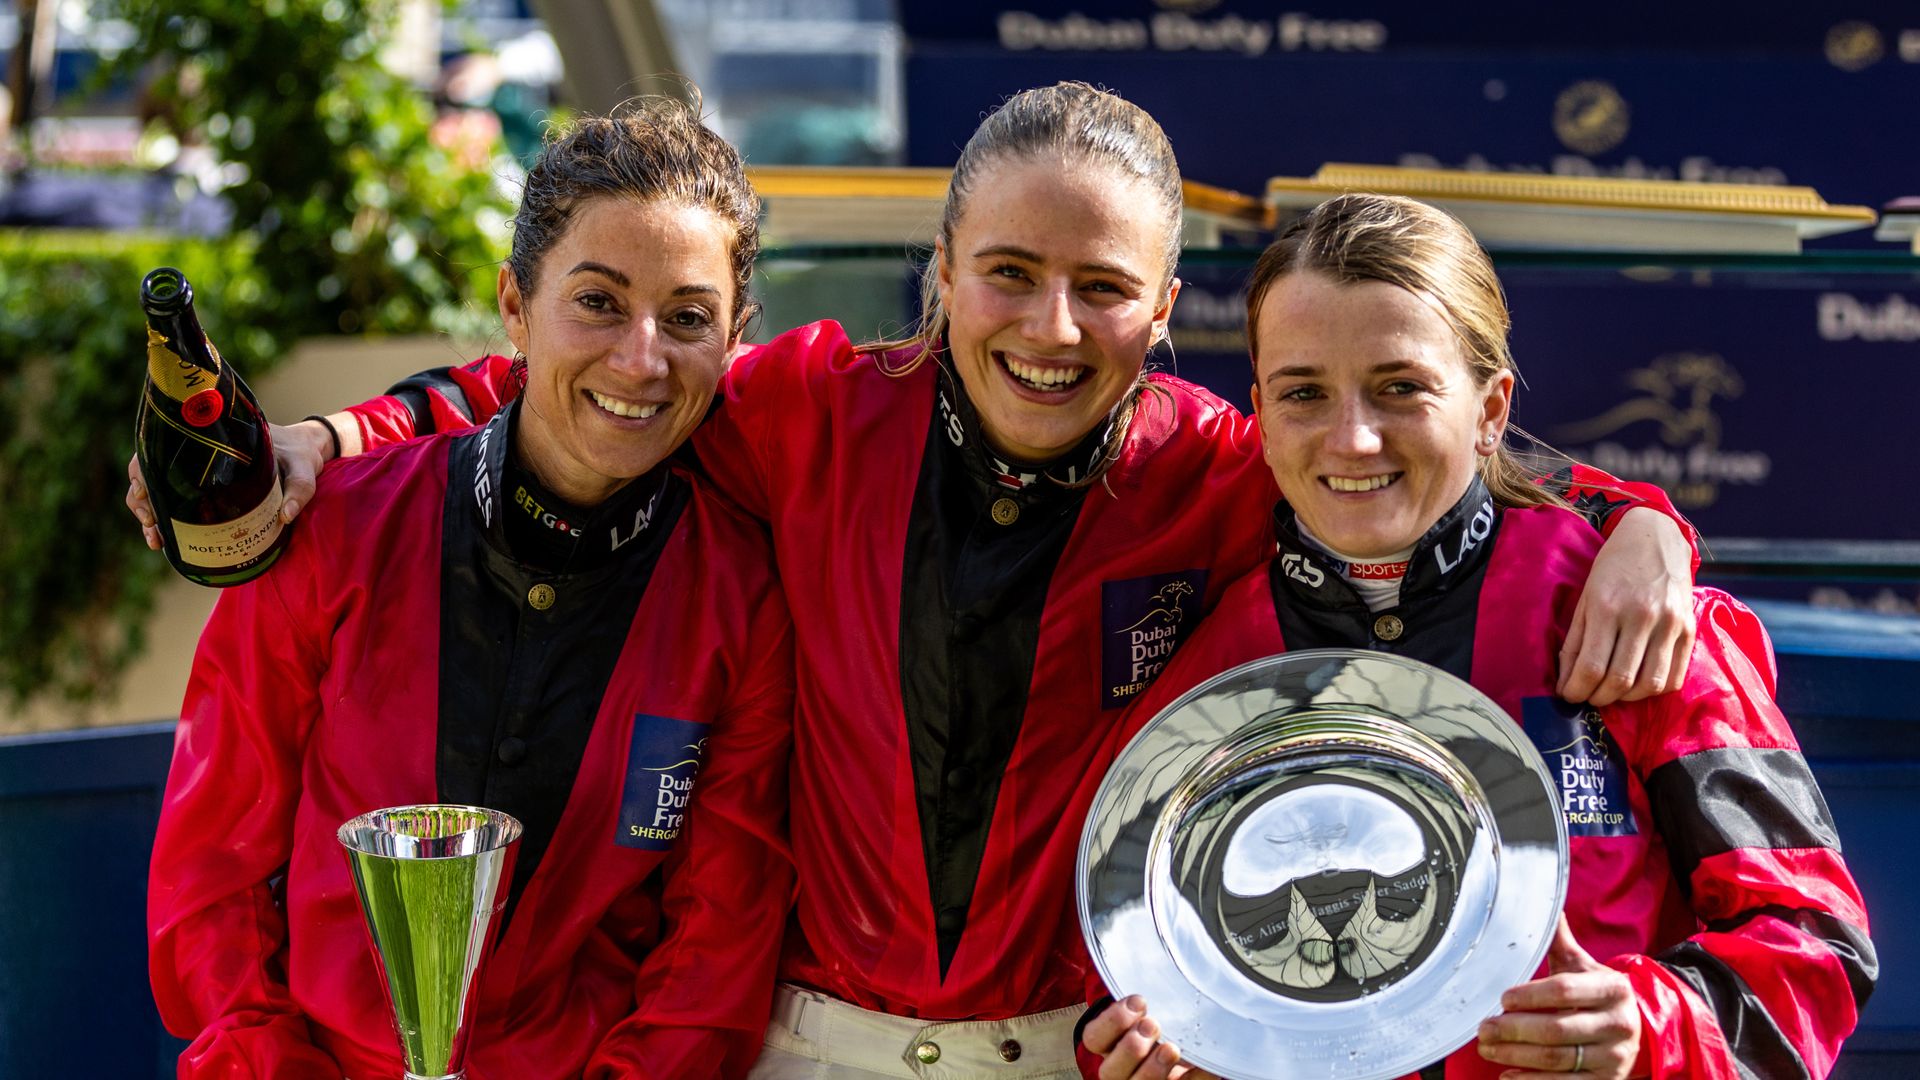 Ladies win Shergar Cup after Osborne and Doyle doubles at Ascot